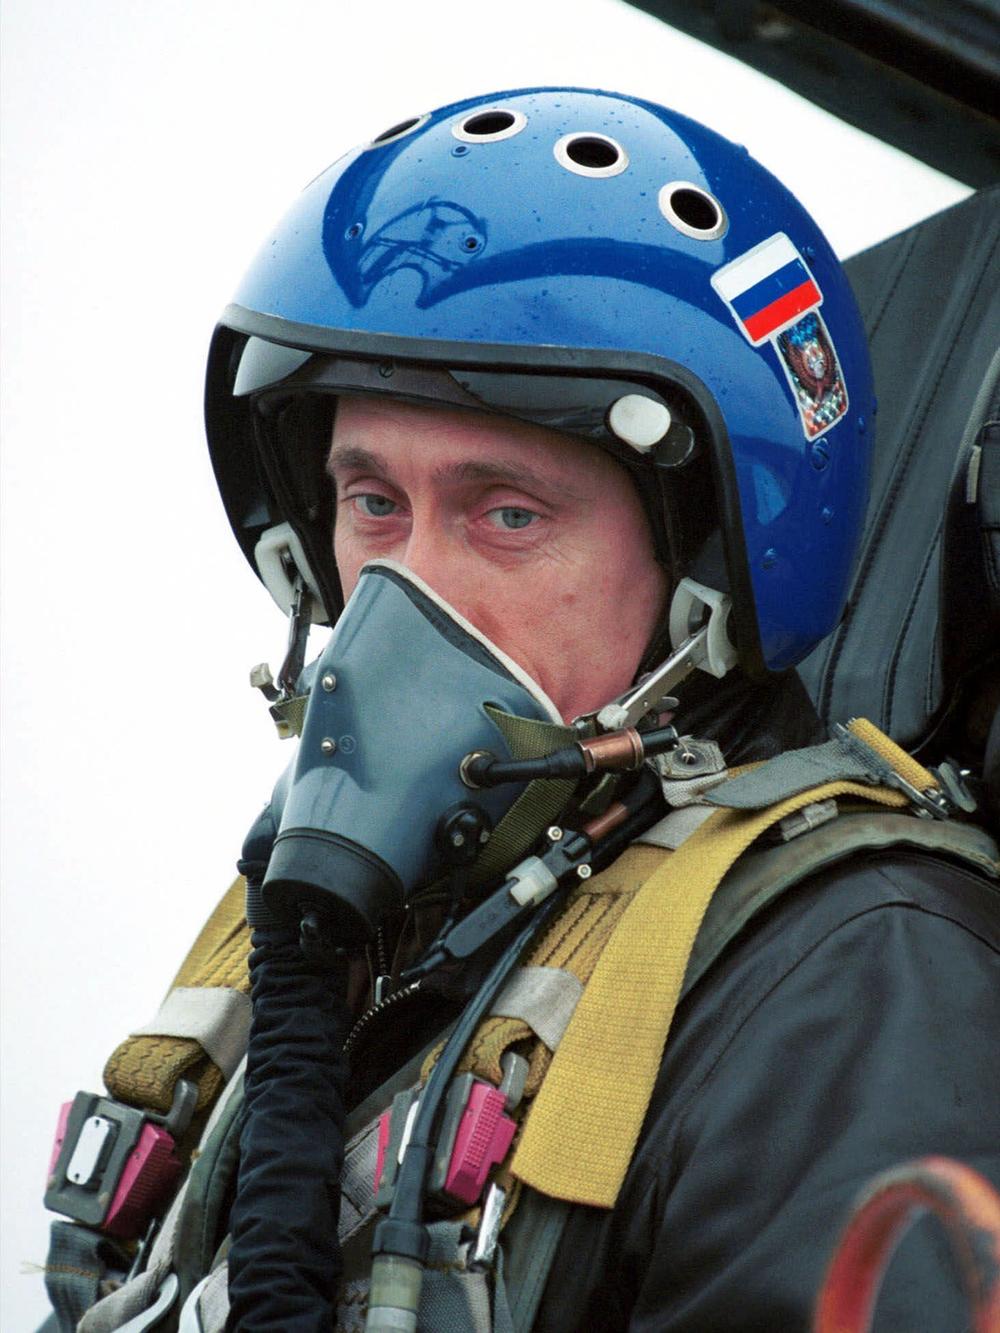 Russian President Vladimir Putin flew into Grozny, Chechnya, in March 2000, traveling in a Su-27 fighter jet after Russia recaptured the territory.